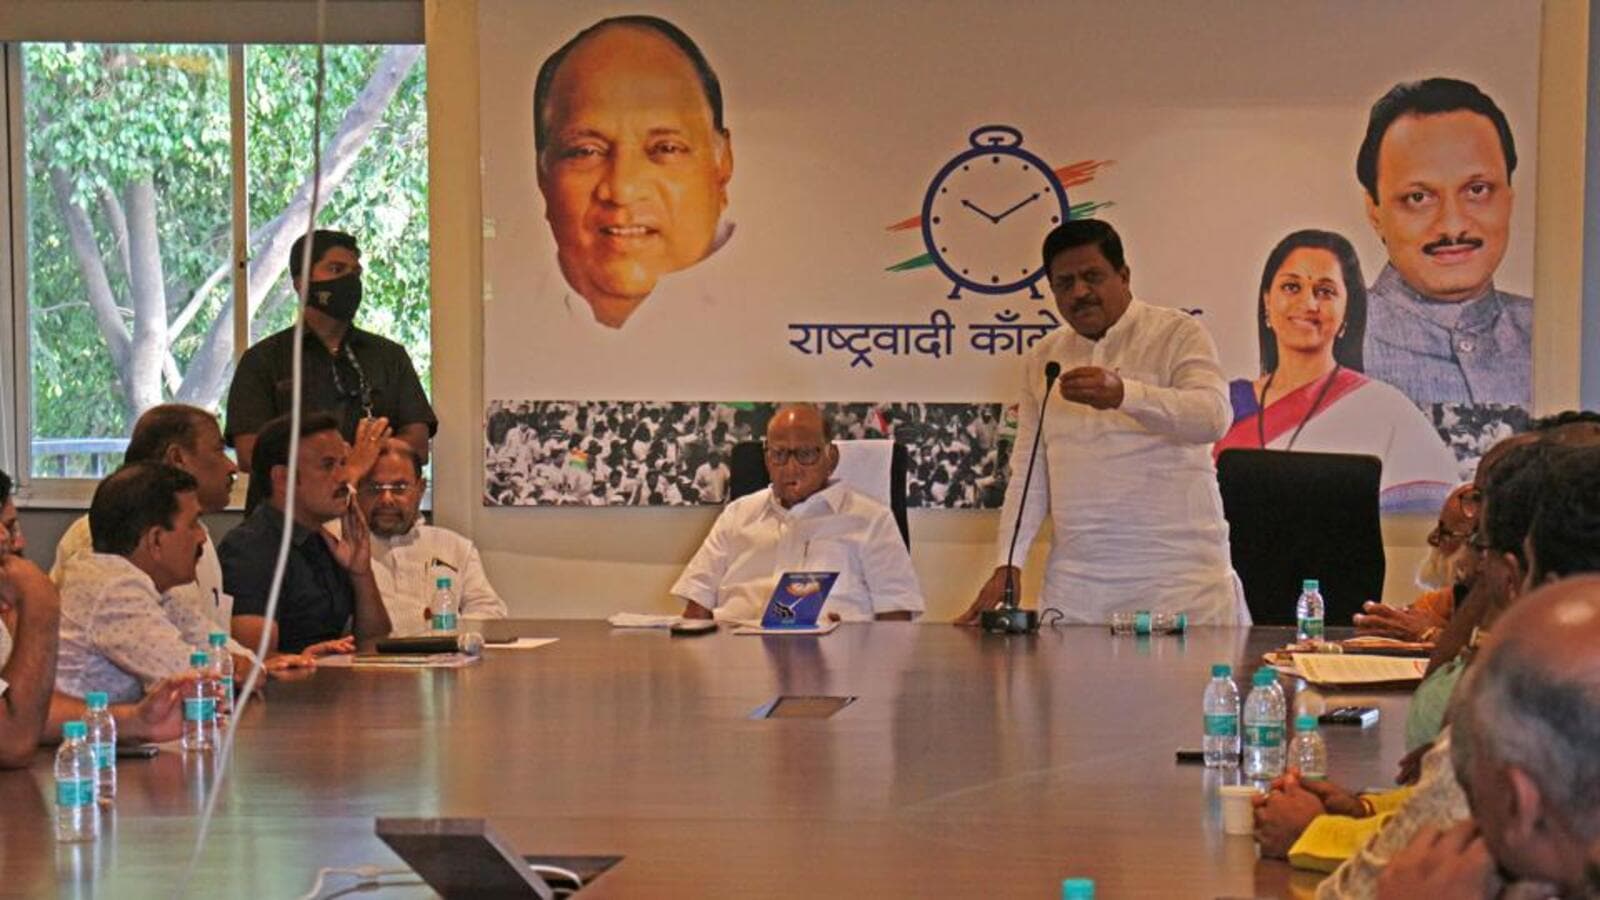 NCP leaders won’t comment on caste, religion anymore, assures Pawar | Mumbai news